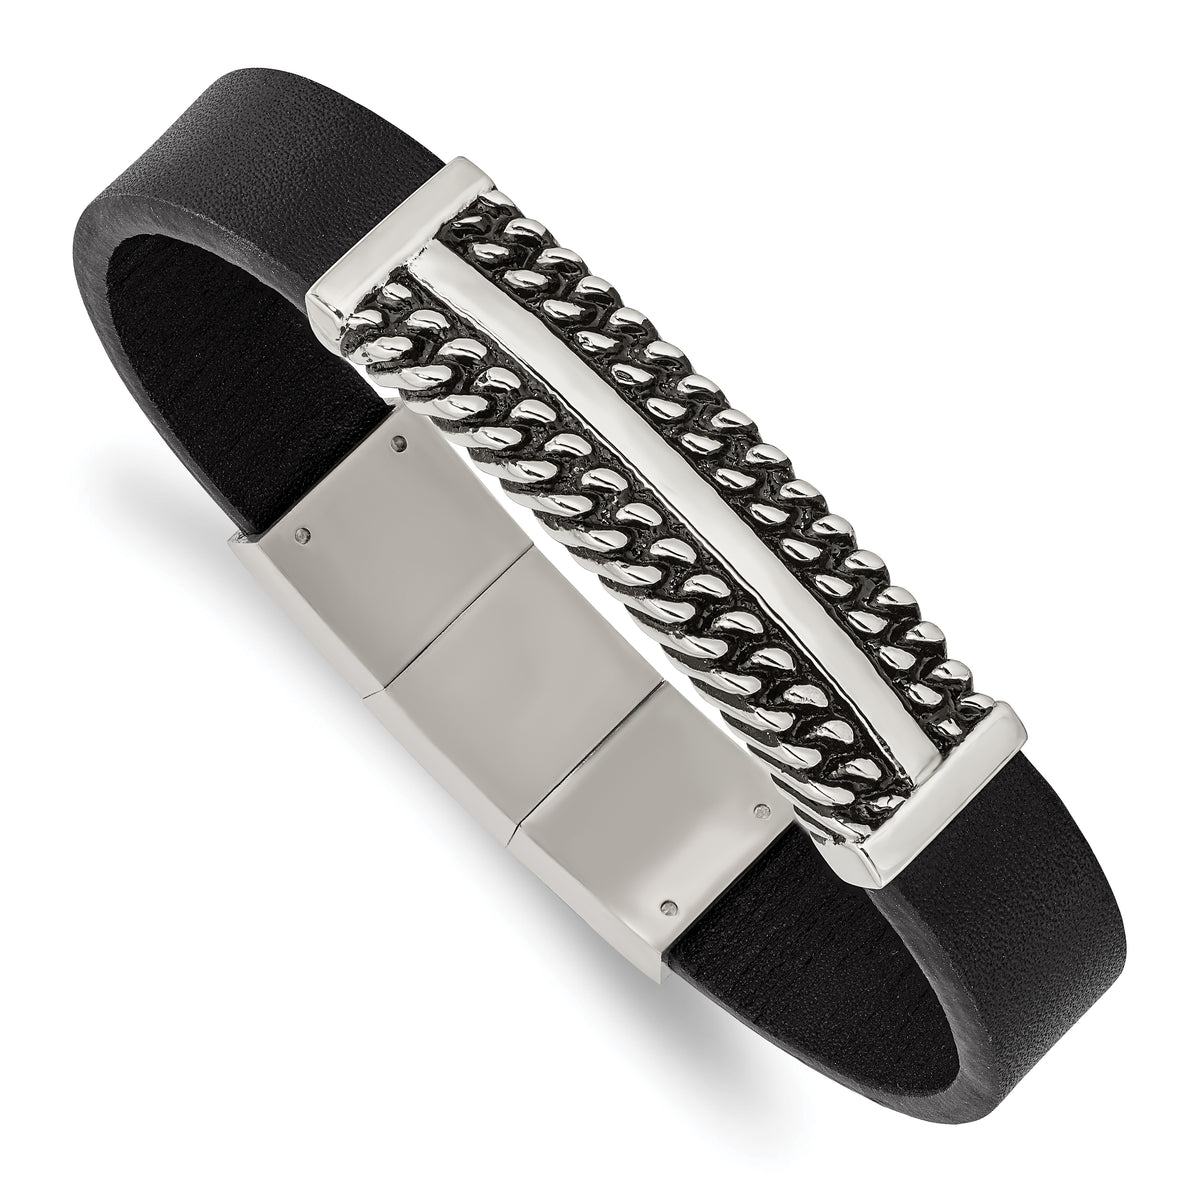 Chisel Stainless Steel Antiqued and Polished Black Leather 8 inch with .5 inch extension Bracelet